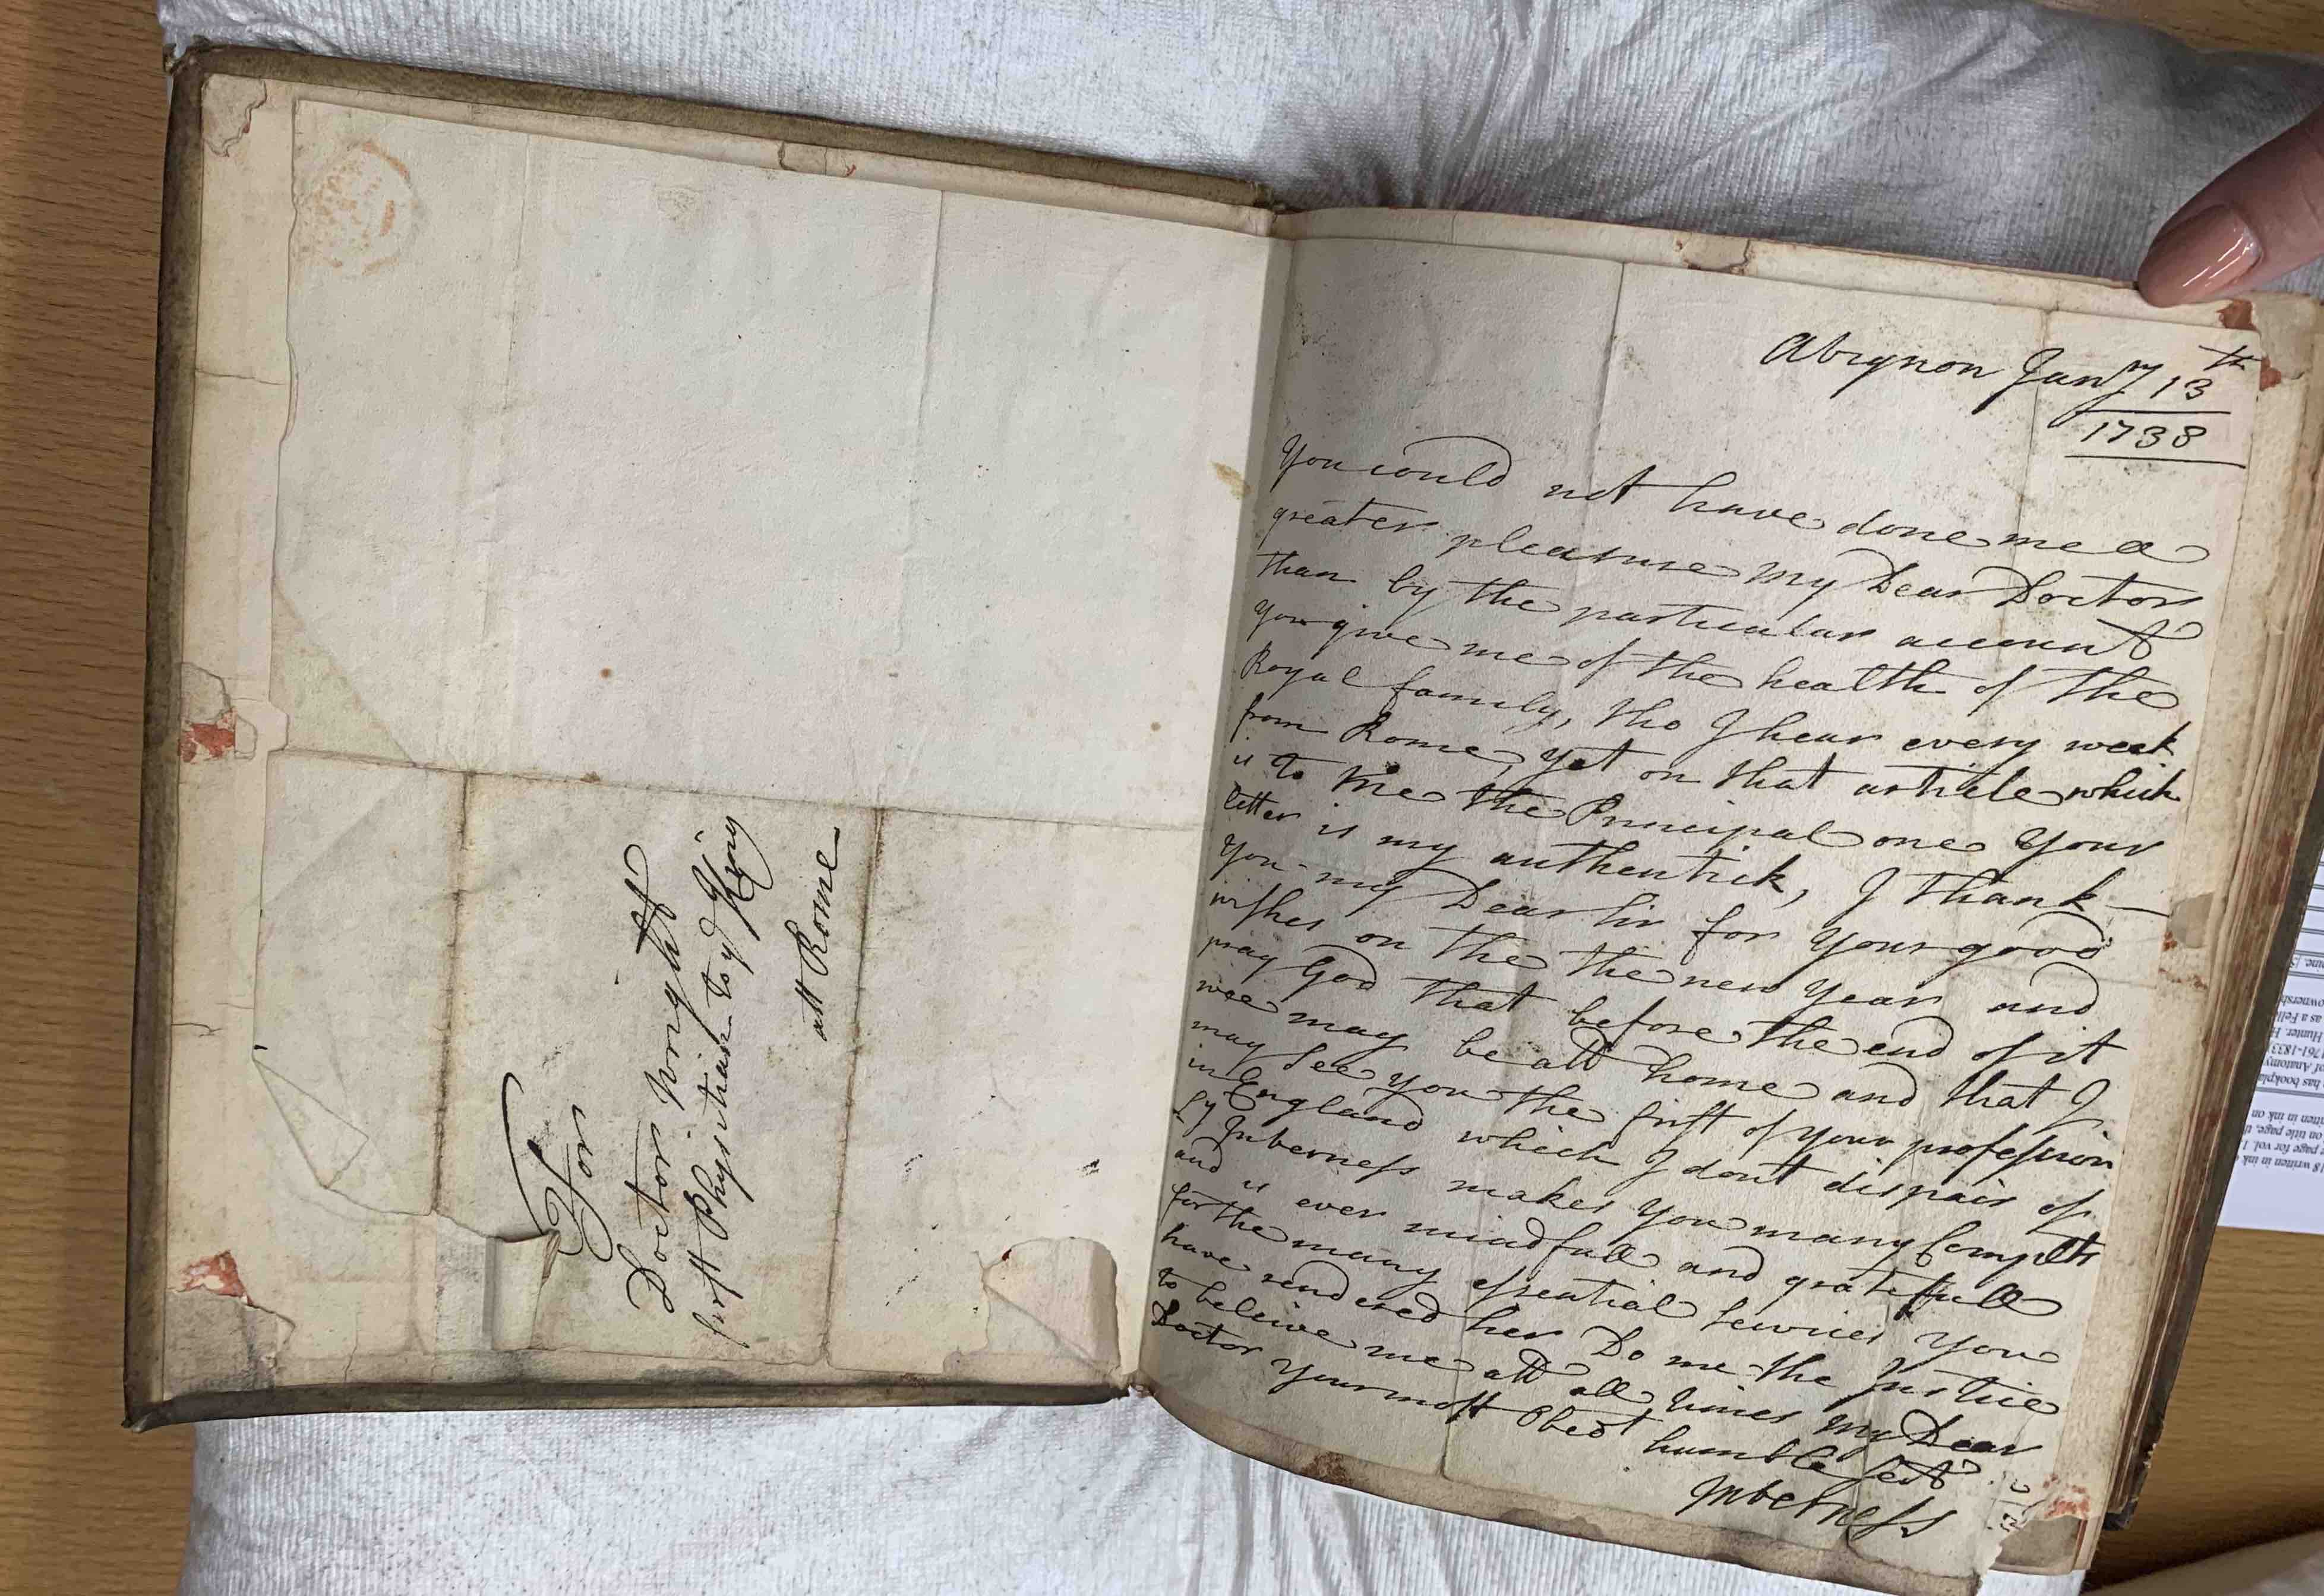 Hidden letter to the Jacobite Court dated January 13, 1738